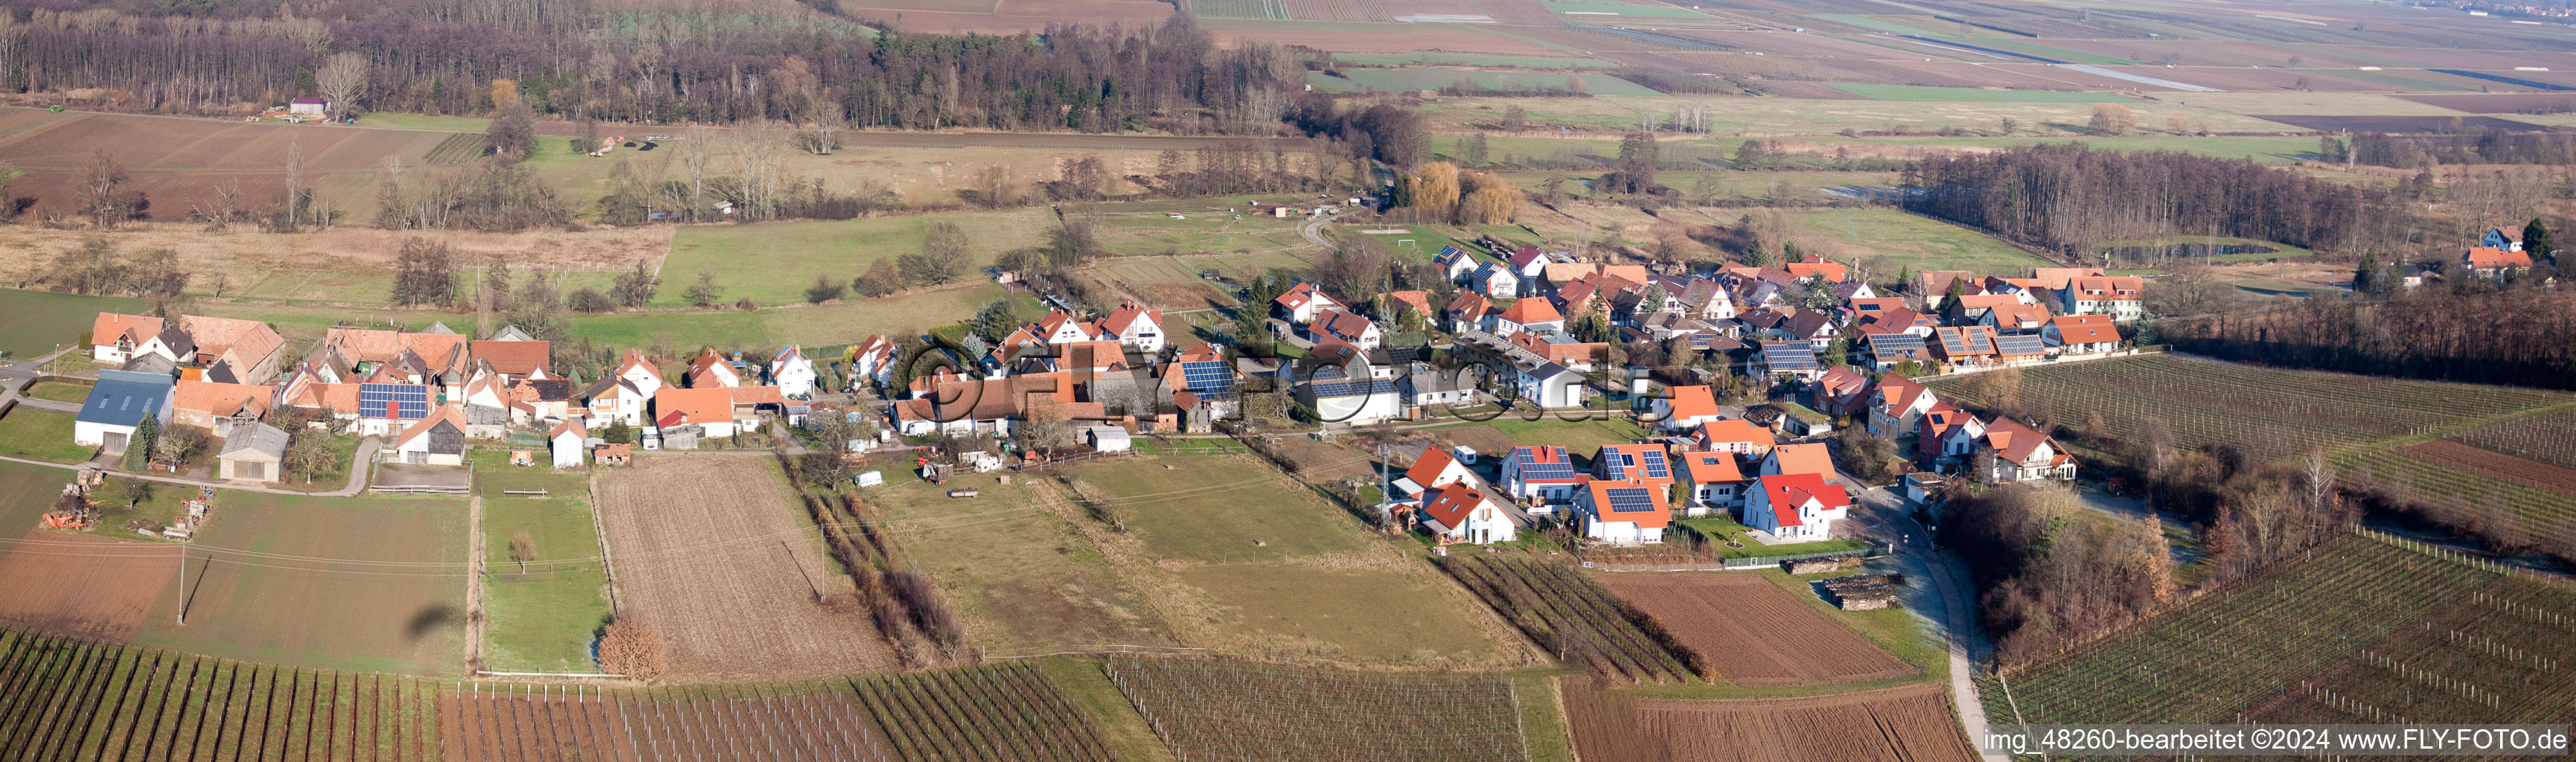 Panoranmic perspective Village - view on the edge of agricultural fields and farmland in Hergersweiler in the state Rhineland-Palatinate, Germany